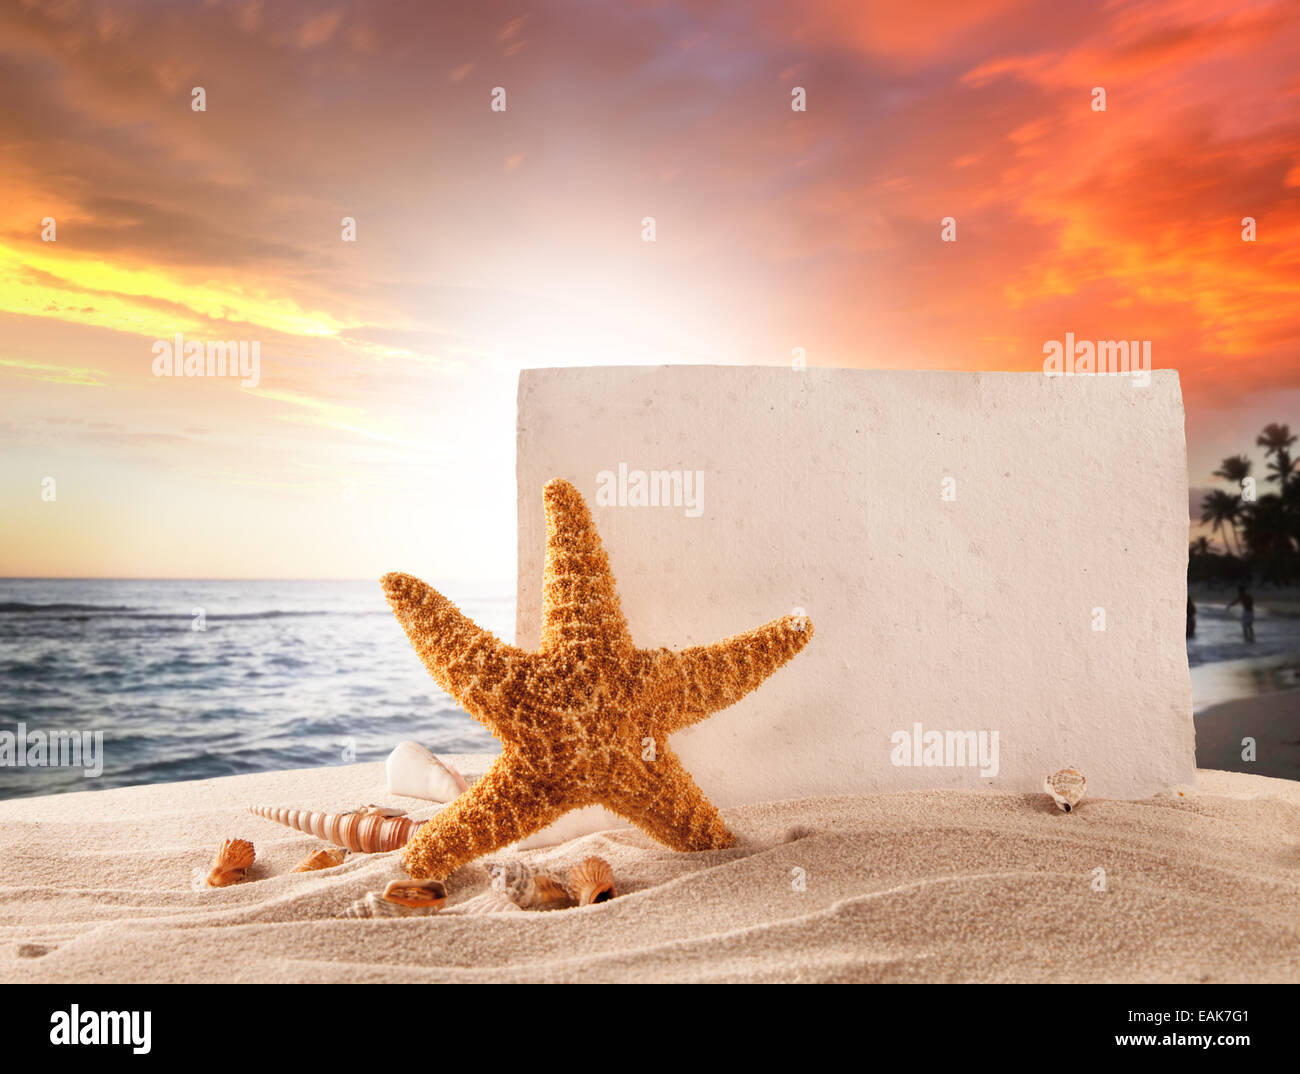 Concept of summer beach with starfish, shells and empty paper on sand Stock Photo